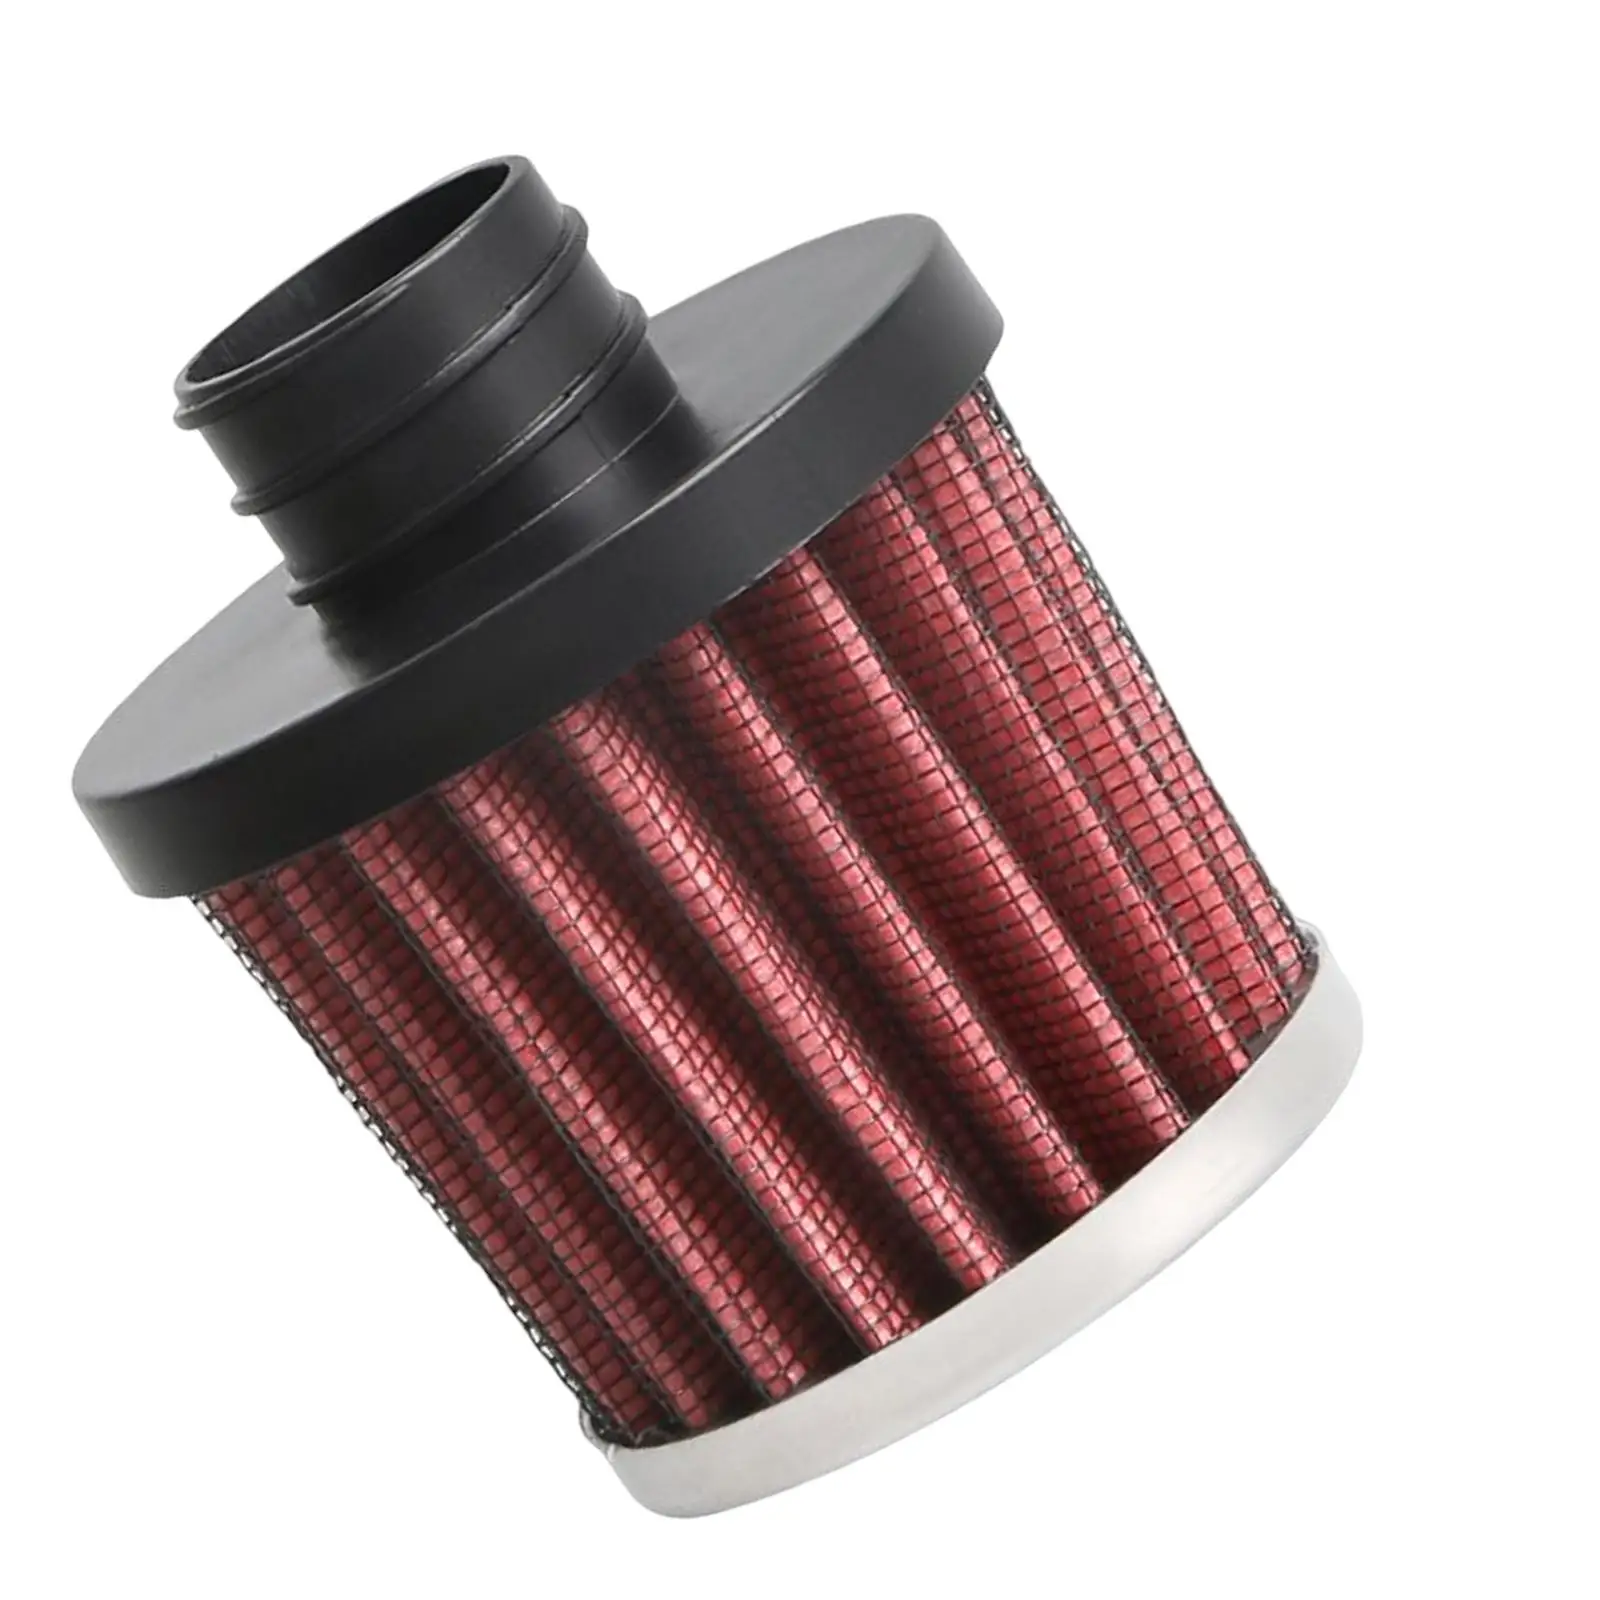 25mm Parking heating Air Filter Universal for Parking heating High Parts Replacement Durable